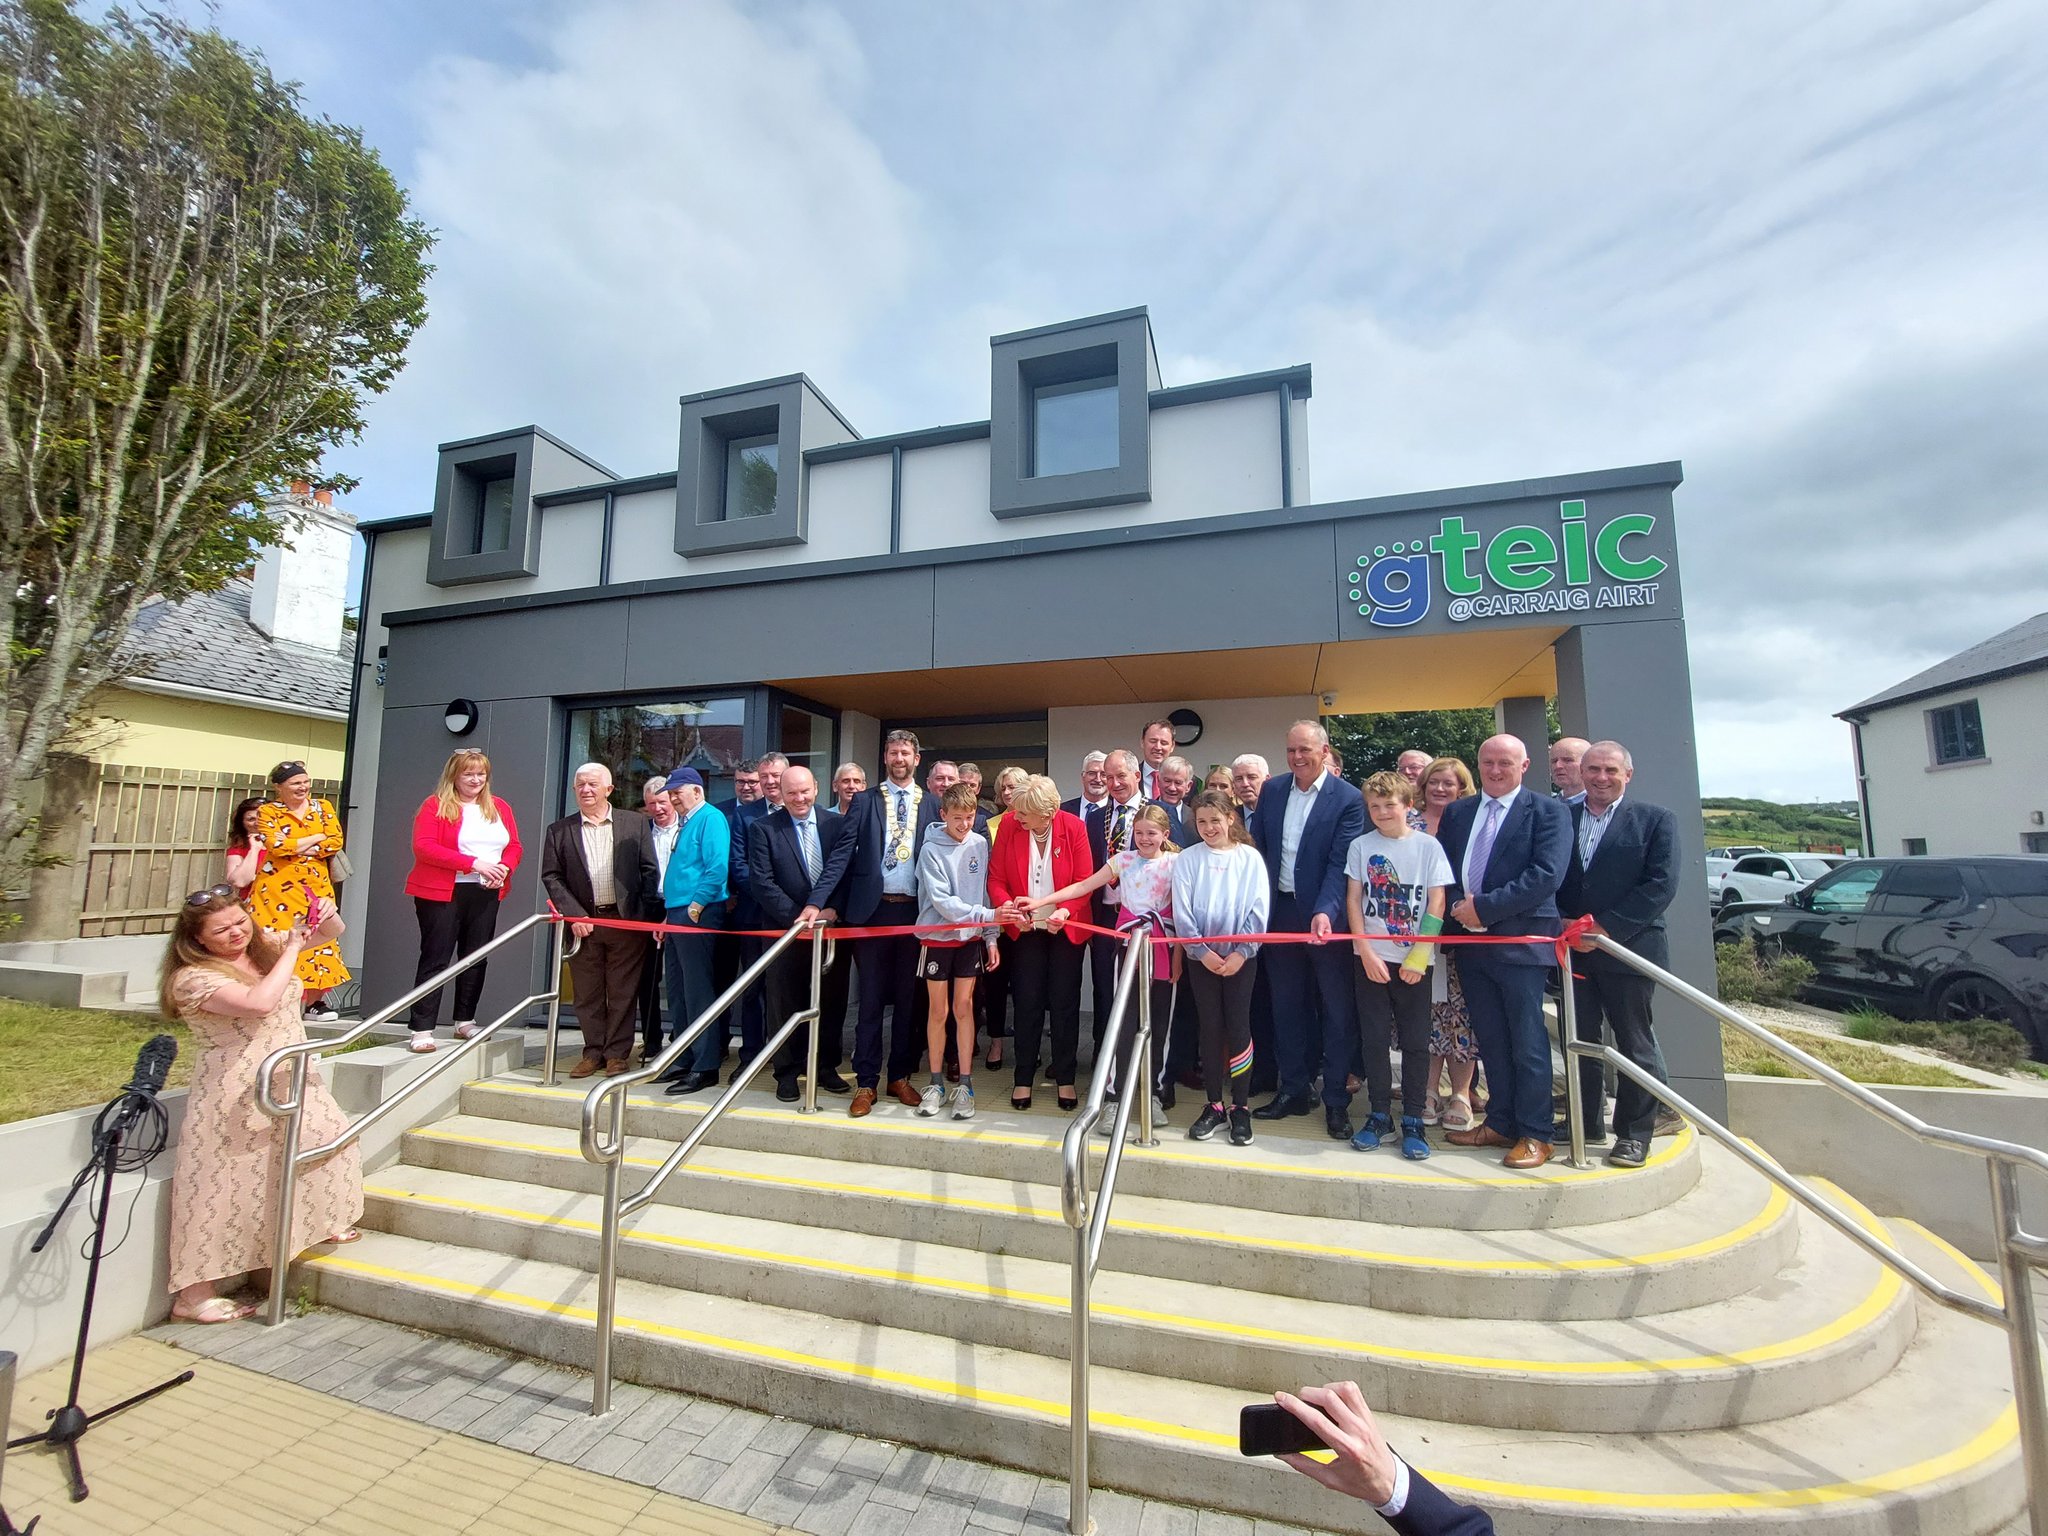 €8 million worth of projects opened by Minister Humphreys in County Donegal 